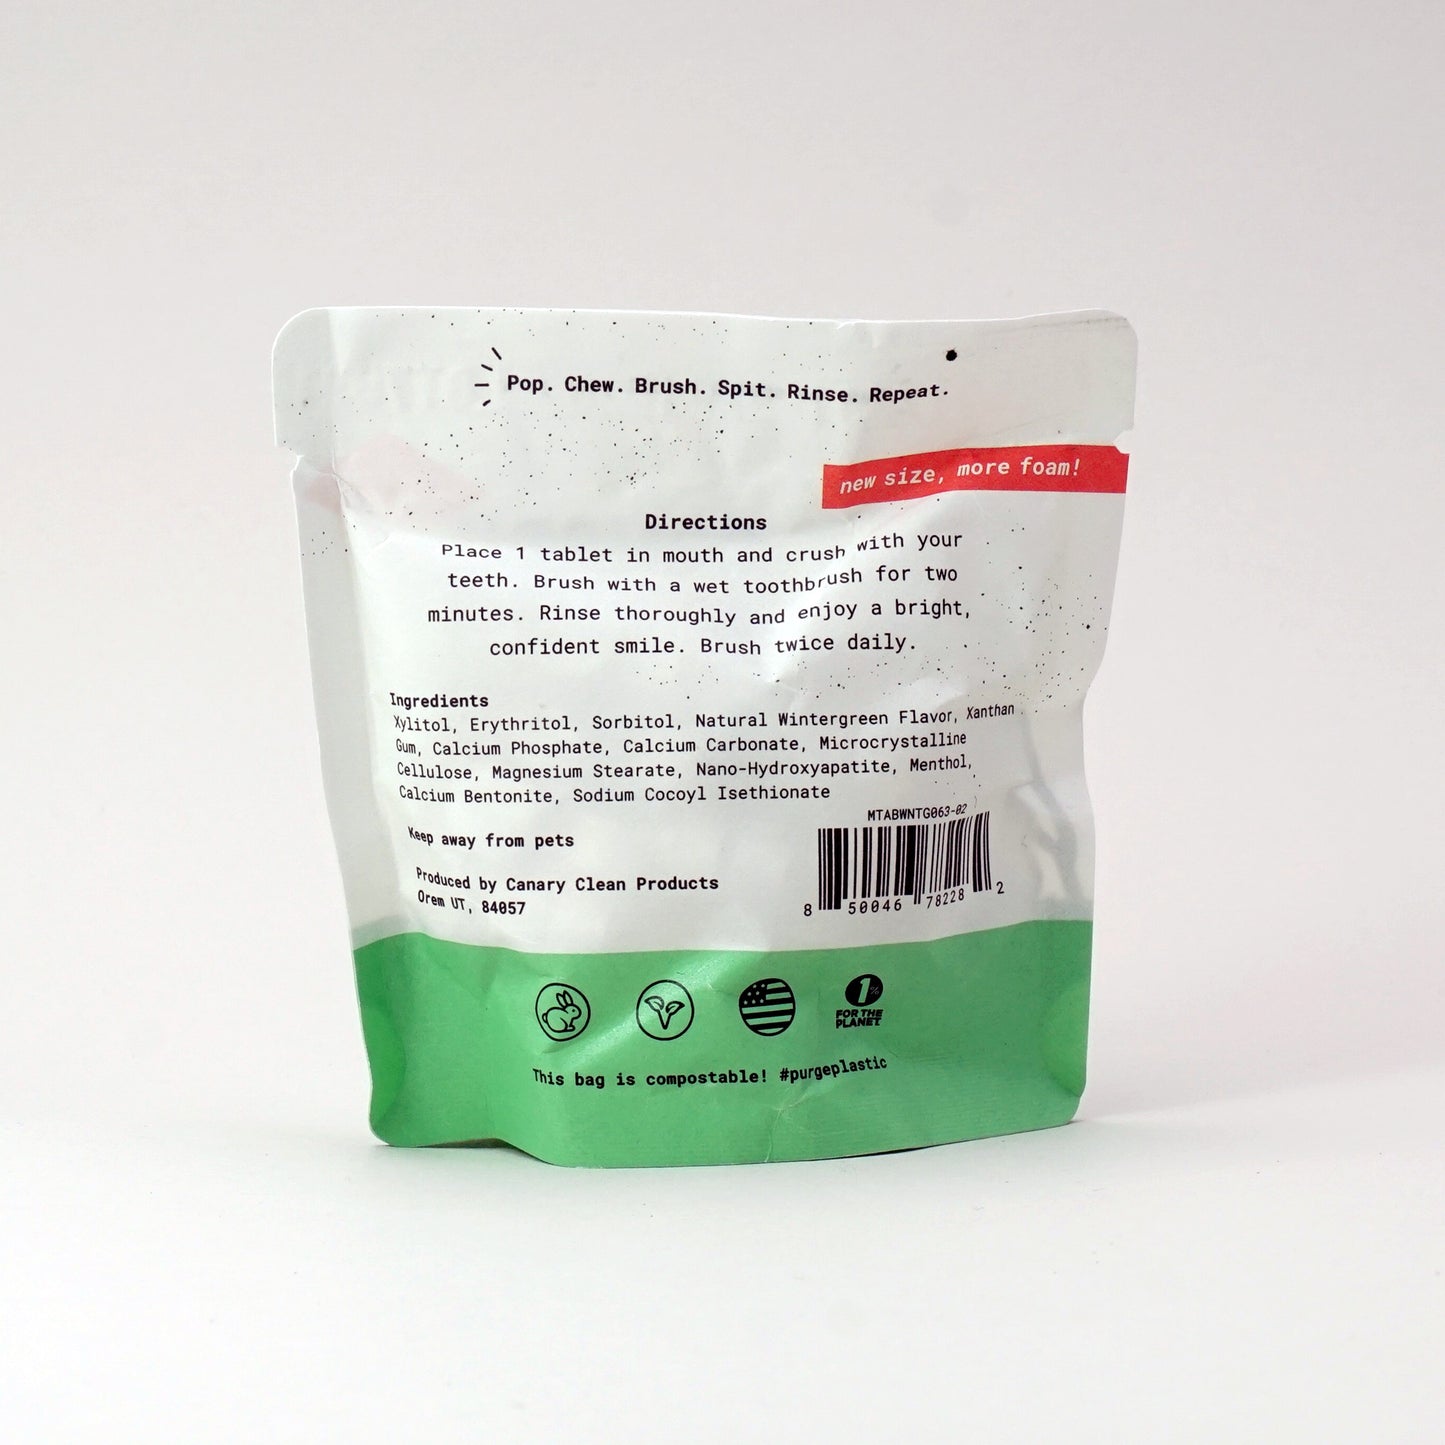 Canary Wintergreen Toothpaste Tablets, sample size 63 count compostable pouch, view of the back of the pouch with ingredients and directions.